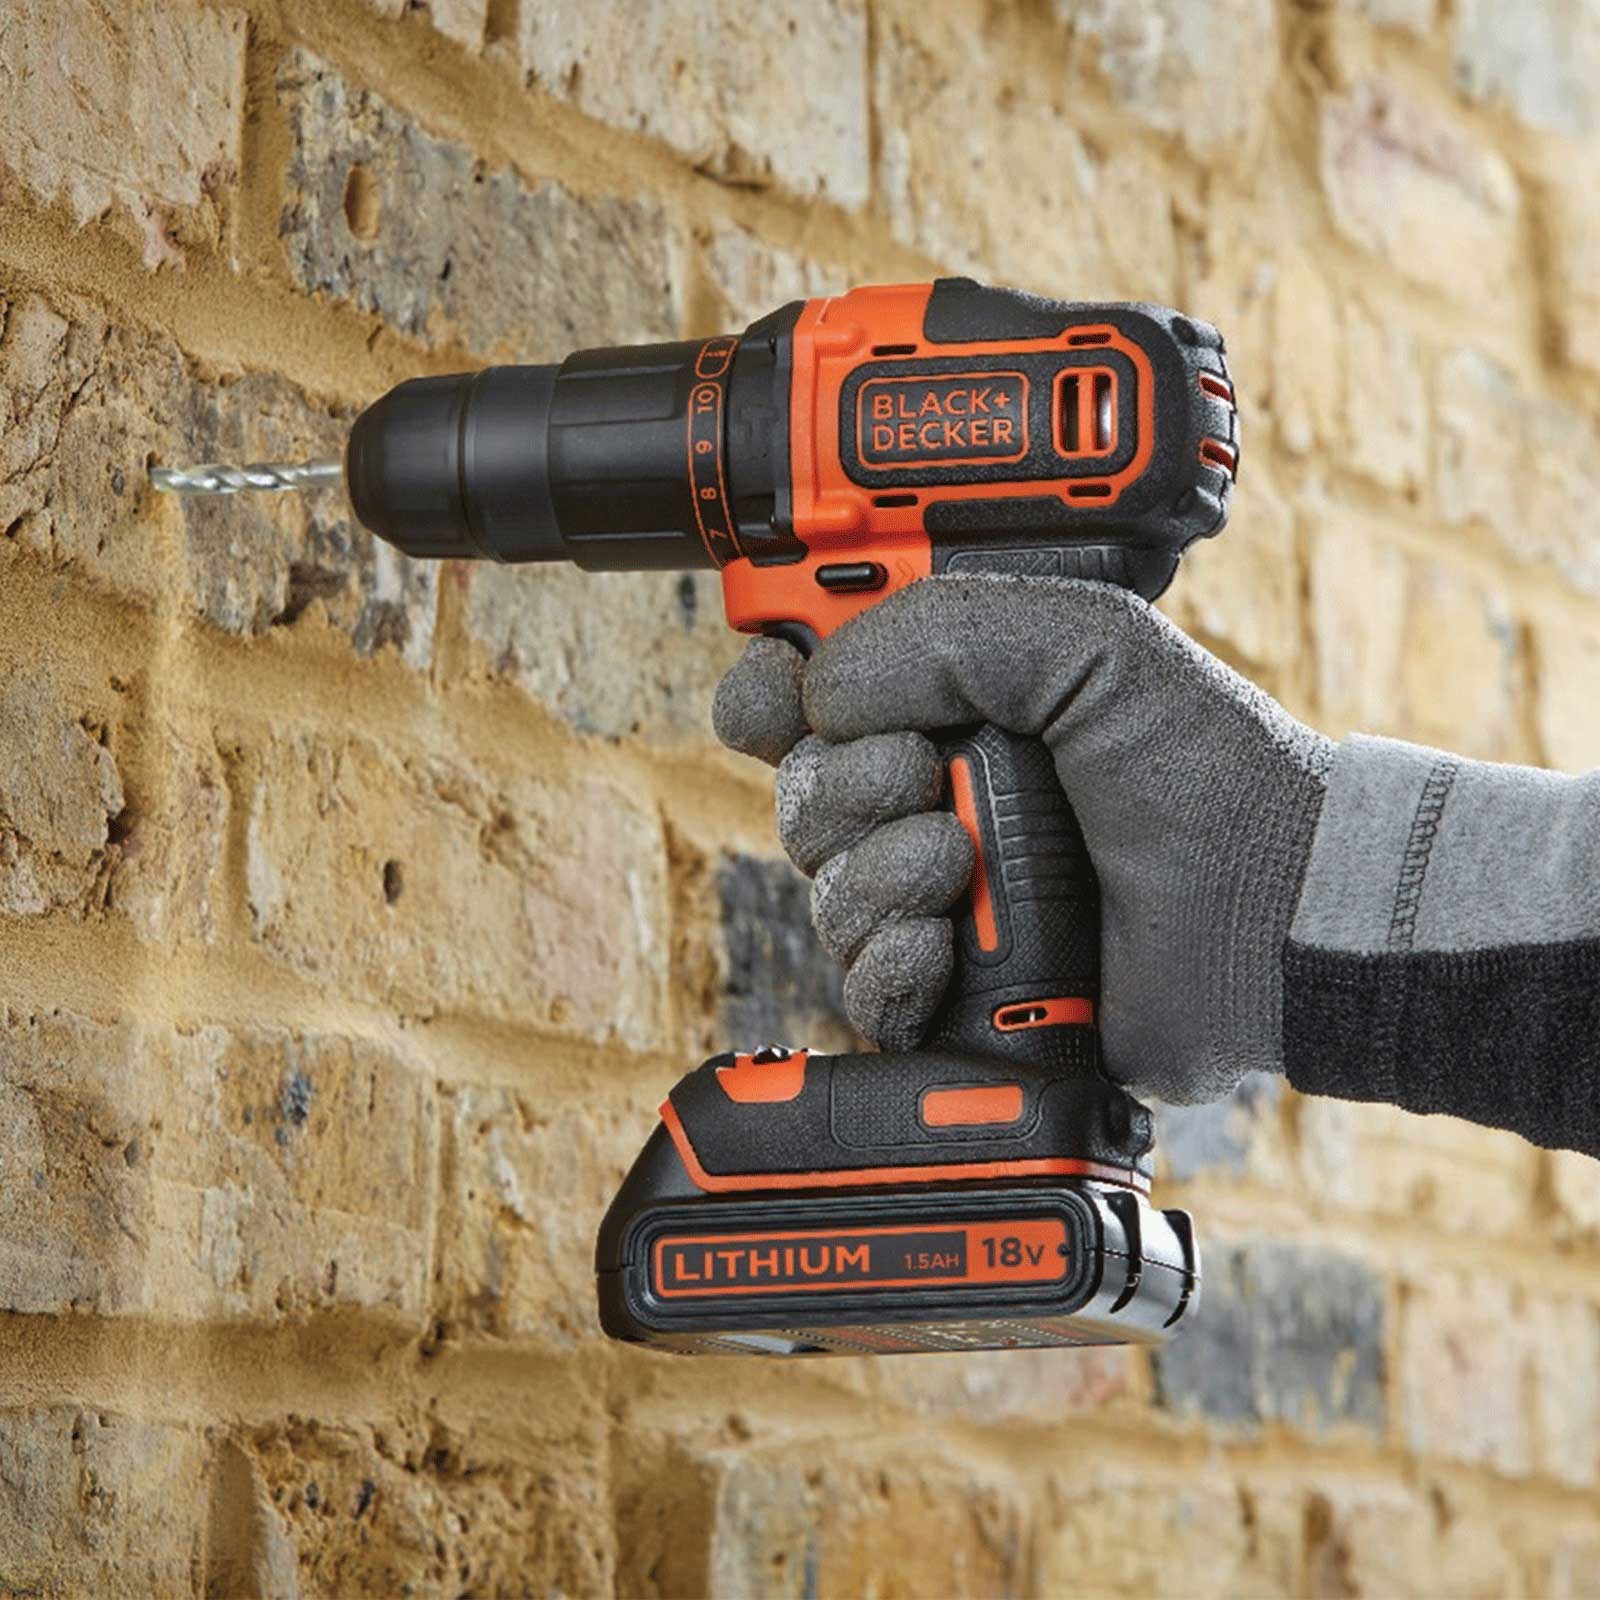 My Honest Review of BLACK+DECKER 20V MAX POWERECONNECT Cordless